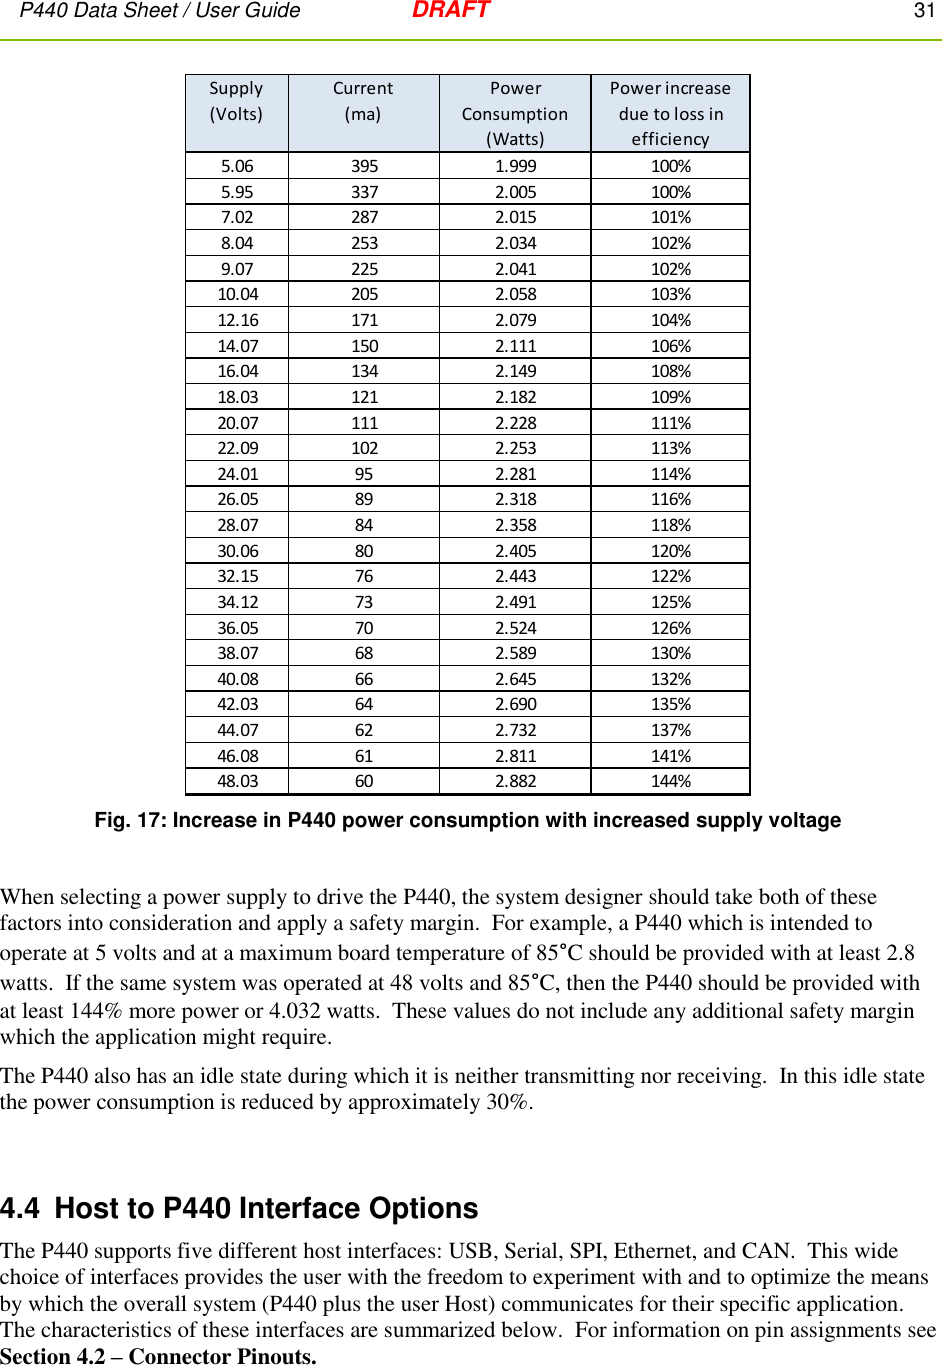 P440 Data Sheet / User Guide   DRAFT    31          Fig. 17: Increase in P440 power consumption with increased supply voltage  When selecting a power supply to drive the P440, the system designer should take both of these factors into consideration and apply a safety margin.  For example, a P440 which is intended to operate at 5 volts and at a maximum board temperature of 85°C should be provided with at least 2.8 watts.  If the same system was operated at 48 volts and 85°C, then the P440 should be provided with at least 144% more power or 4.032 watts.  These values do not include any additional safety margin which the application might require. The P440 also has an idle state during which it is neither transmitting nor receiving.  In this idle state the power consumption is reduced by approximately 30%.  4.4  Host to P440 Interface Options The P440 supports five different host interfaces: USB, Serial, SPI, Ethernet, and CAN.  This wide choice of interfaces provides the user with the freedom to experiment with and to optimize the means by which the overall system (P440 plus the user Host) communicates for their specific application. The characteristics of these interfaces are summarized below.  For information on pin assignments see Section 4.2 – Connector Pinouts.    Supply (Volts)Current              (ma)Power Consumption (Watts)Power increase due to loss in efficiency5.06 395 1.999 100%5.95 337 2.005 100%7.02 287 2.015 101%8.04 253 2.034 102%9.07 225 2.041 102%10.04 205 2.058 103%12.16 171 2.079 104%14.07 150 2.111 106%16.04 134 2.149 108%18.03 121 2.182 109%20.07 111 2.228 111%22.09 102 2.253 113%24.01 95 2.281 114%26.05 89 2.318 116%28.07 84 2.358 118%30.06 80 2.405 120%32.15 76 2.443 122%34.12 73 2.491 125%36.05 70 2.524 126%38.07 68 2.589 130%40.08 66 2.645 132%42.03 64 2.690 135%44.07 62 2.732 137%46.08 61 2.811 141%48.03 60 2.882 144%